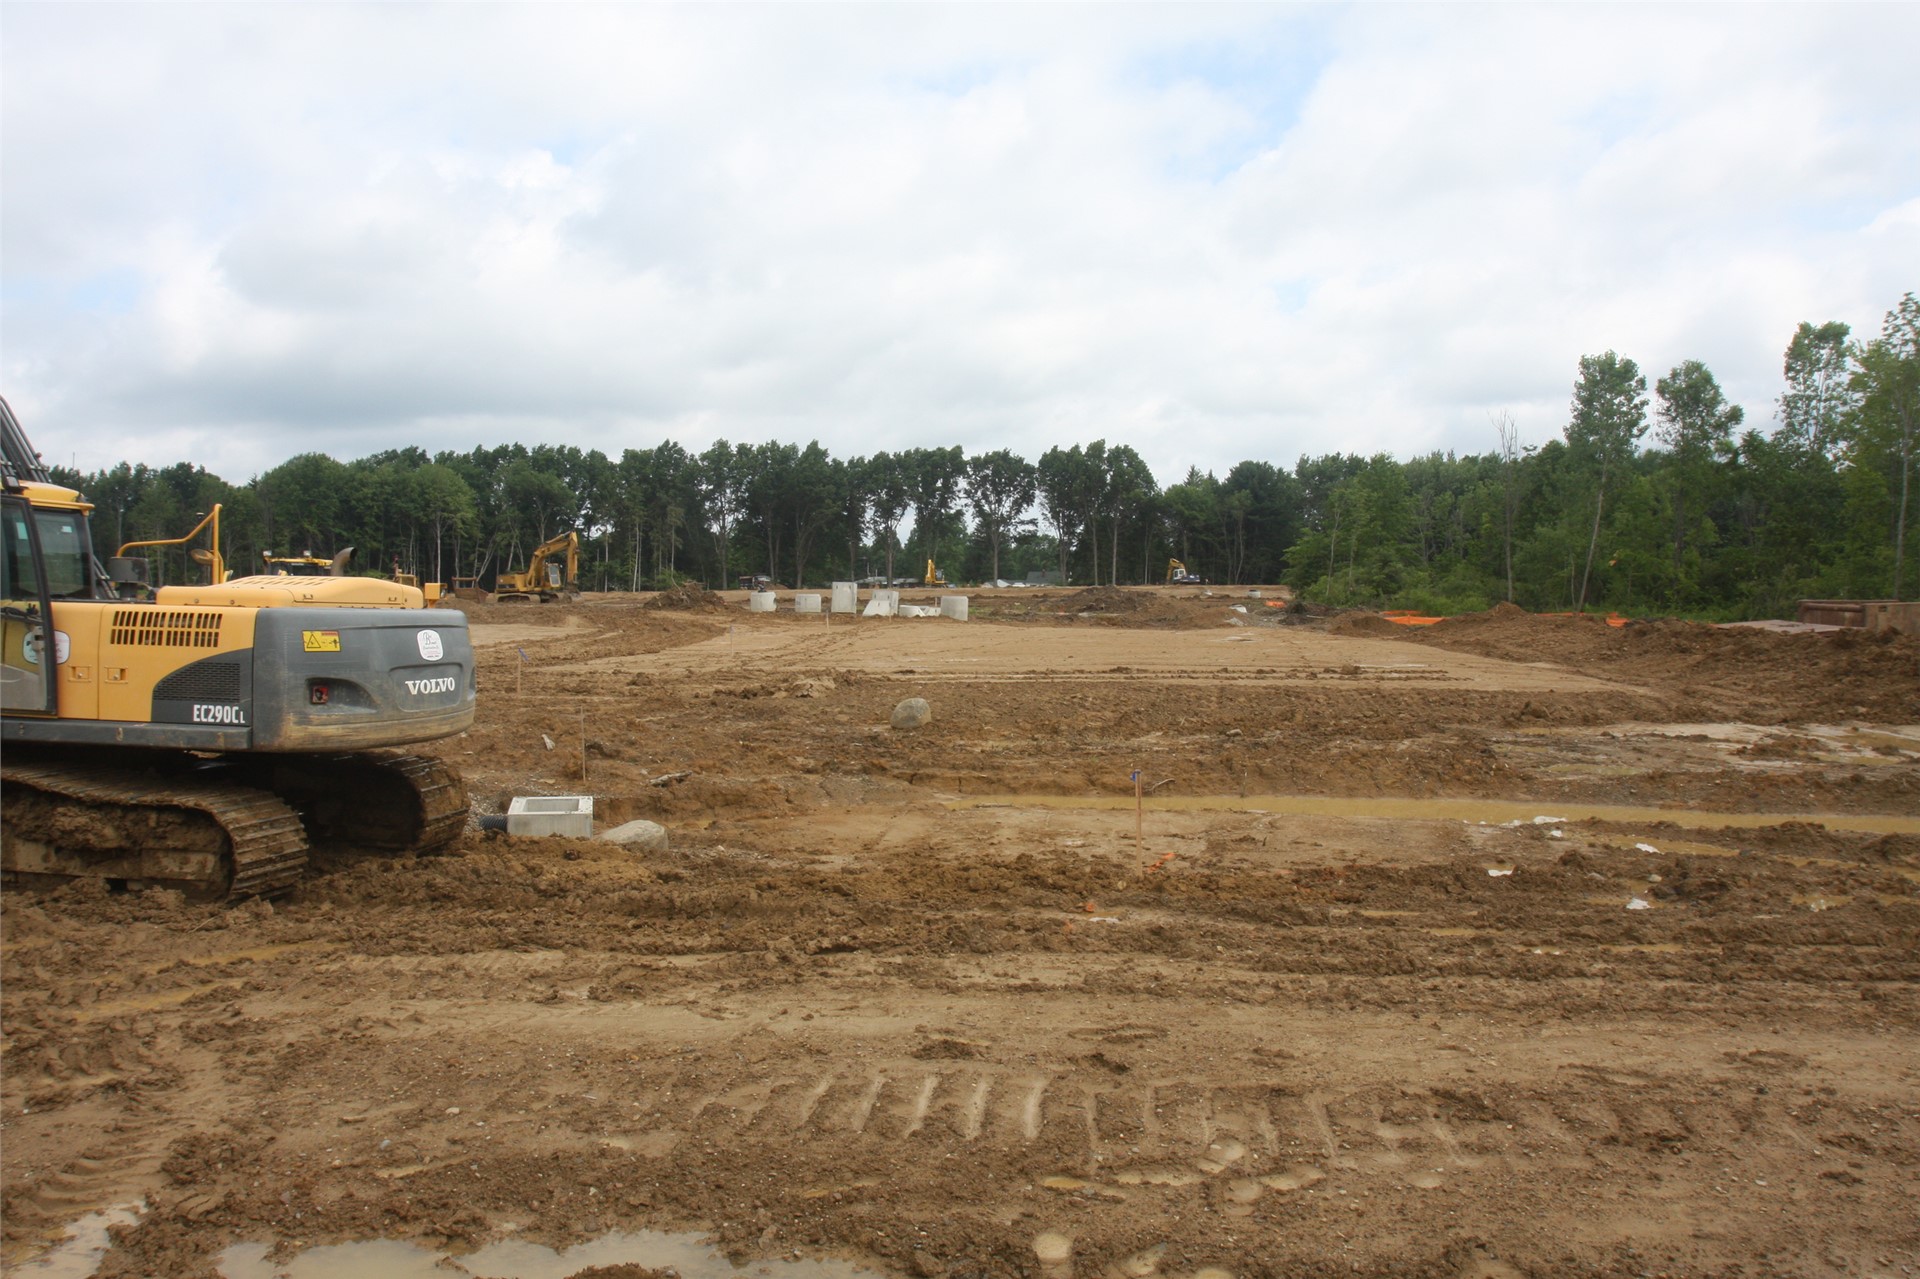 View of parking lot facing new high school